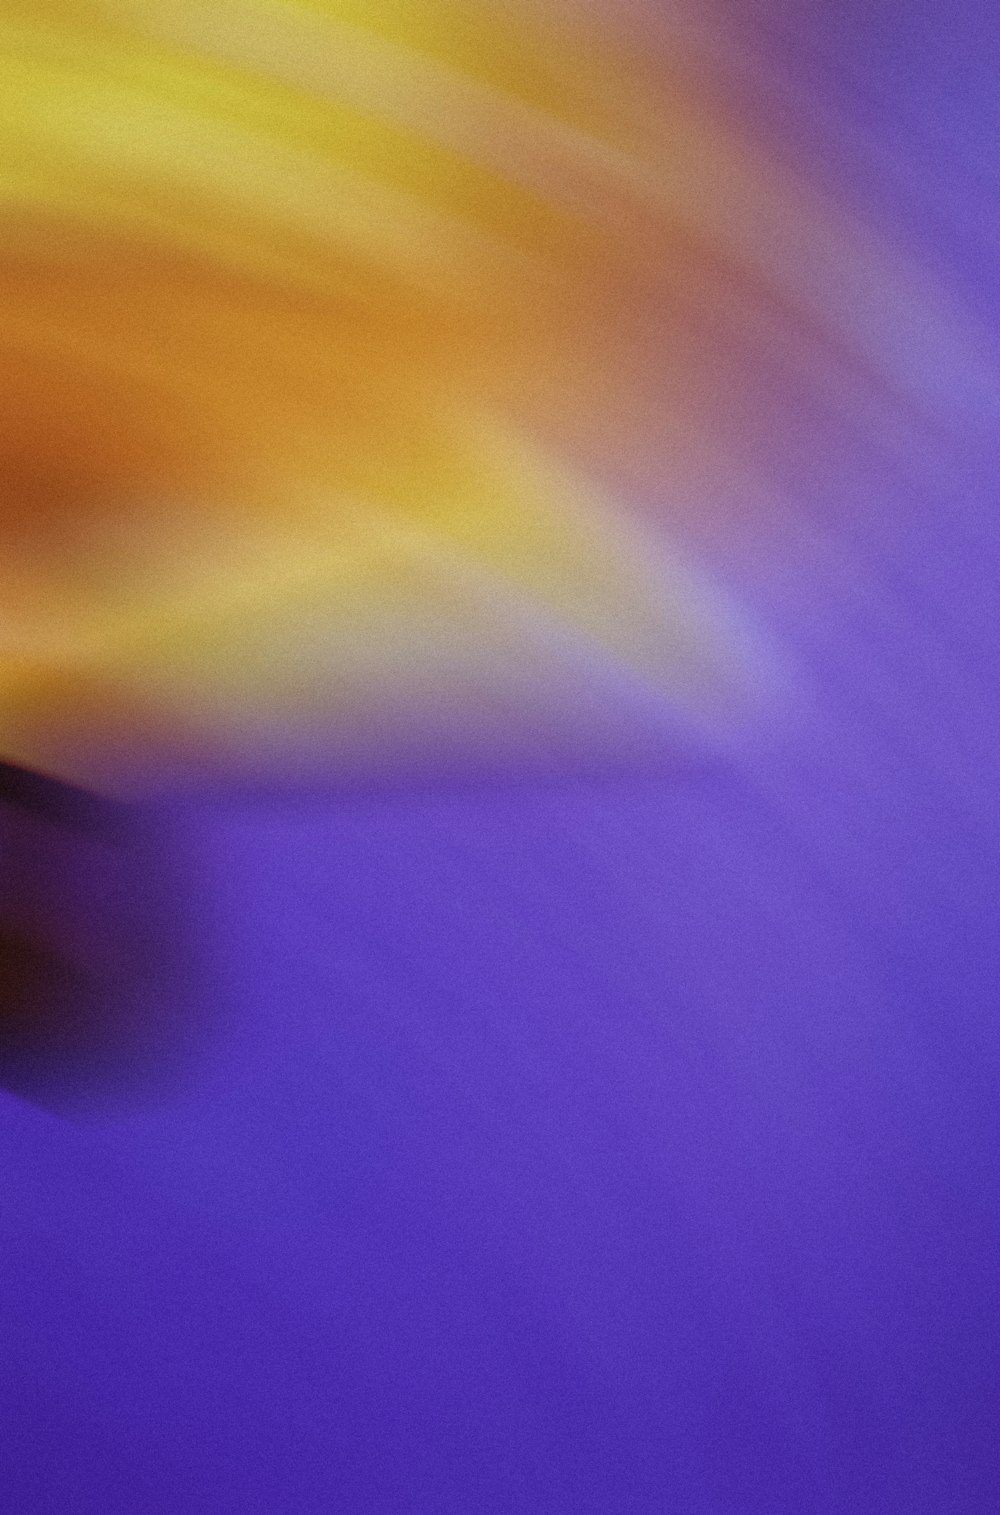 a blurry photo of a purple and yellow object